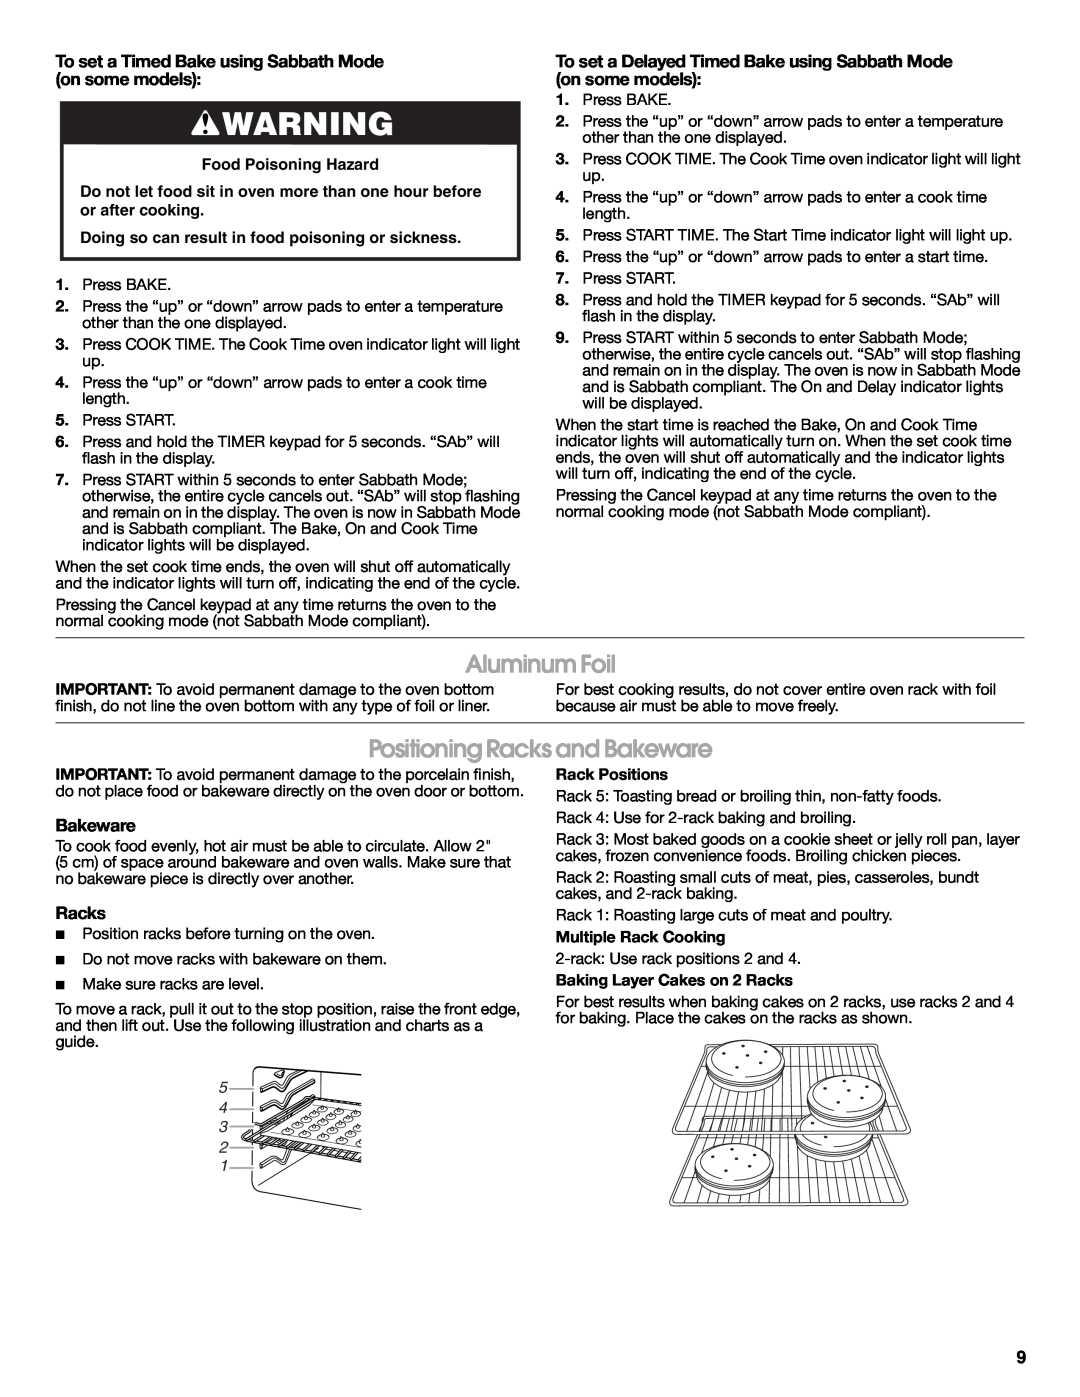 Whirlpool W10545225B Aluminum Foil, Positioning Racks and Bakeware, To set a Timed Bake using Sabbath Mode on some models 